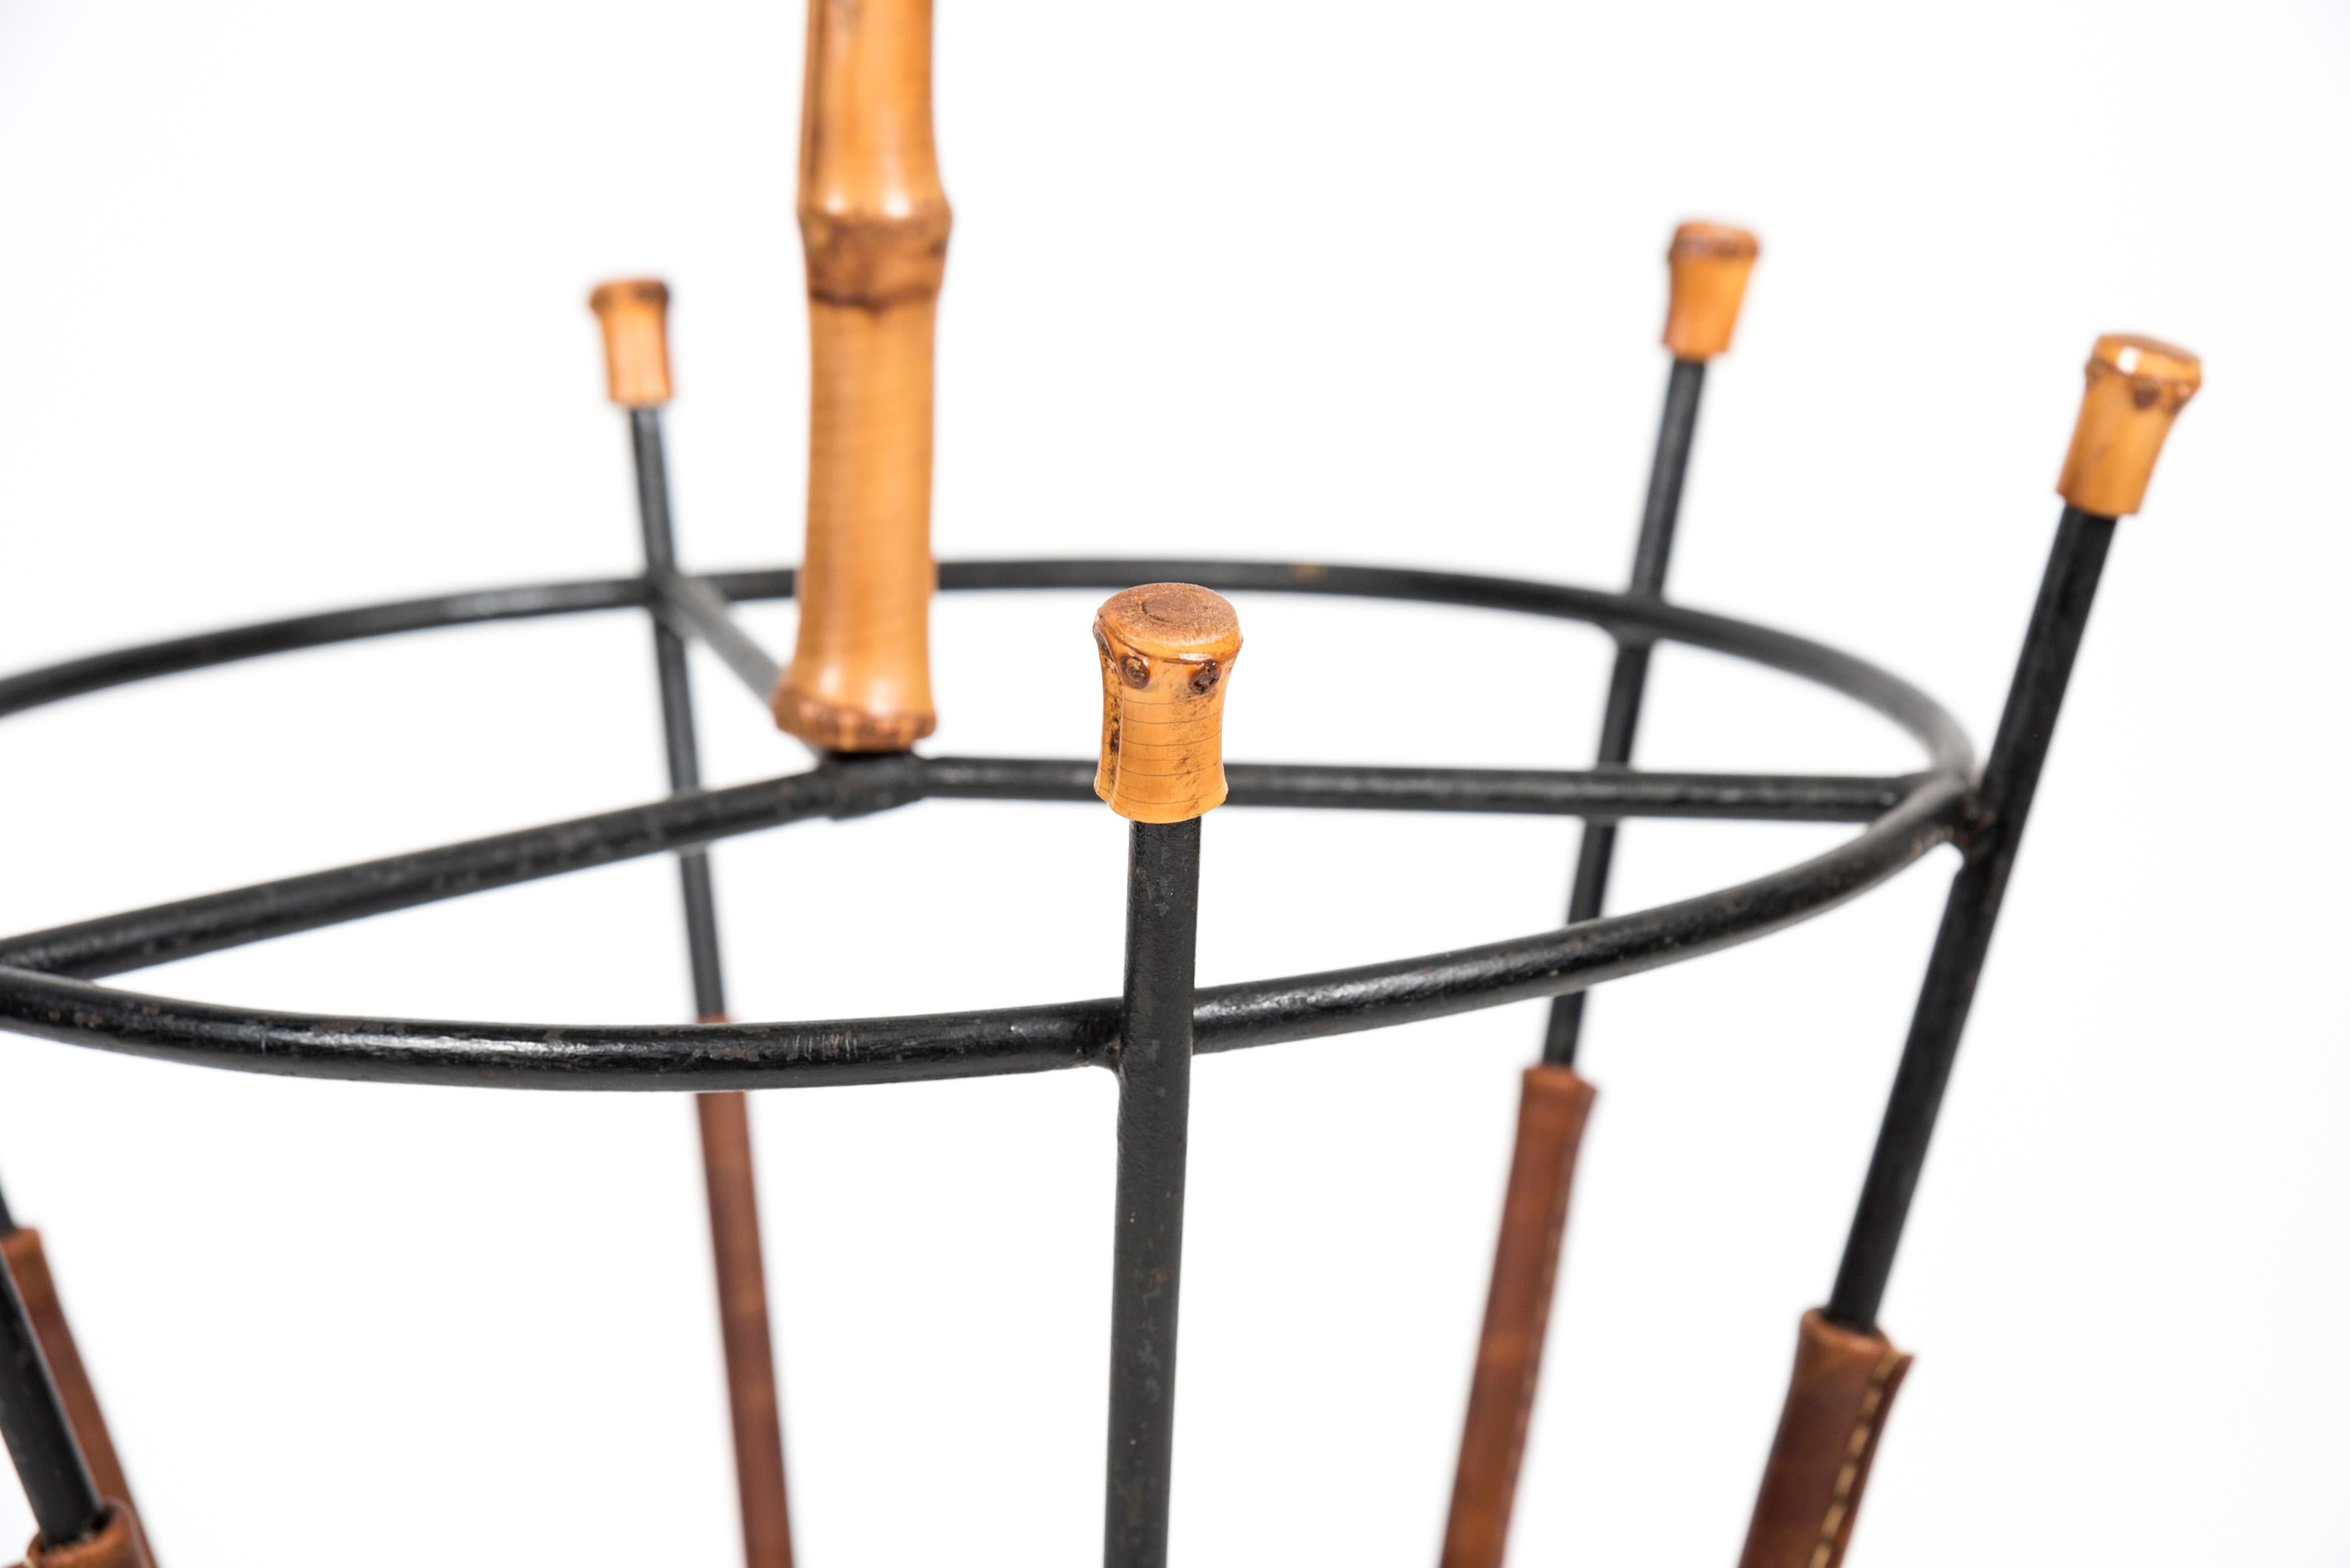 Mid-20th Century 1950s Stitched Leather and Bamboo Umbrella Stand by Jacques Adnet For Sale